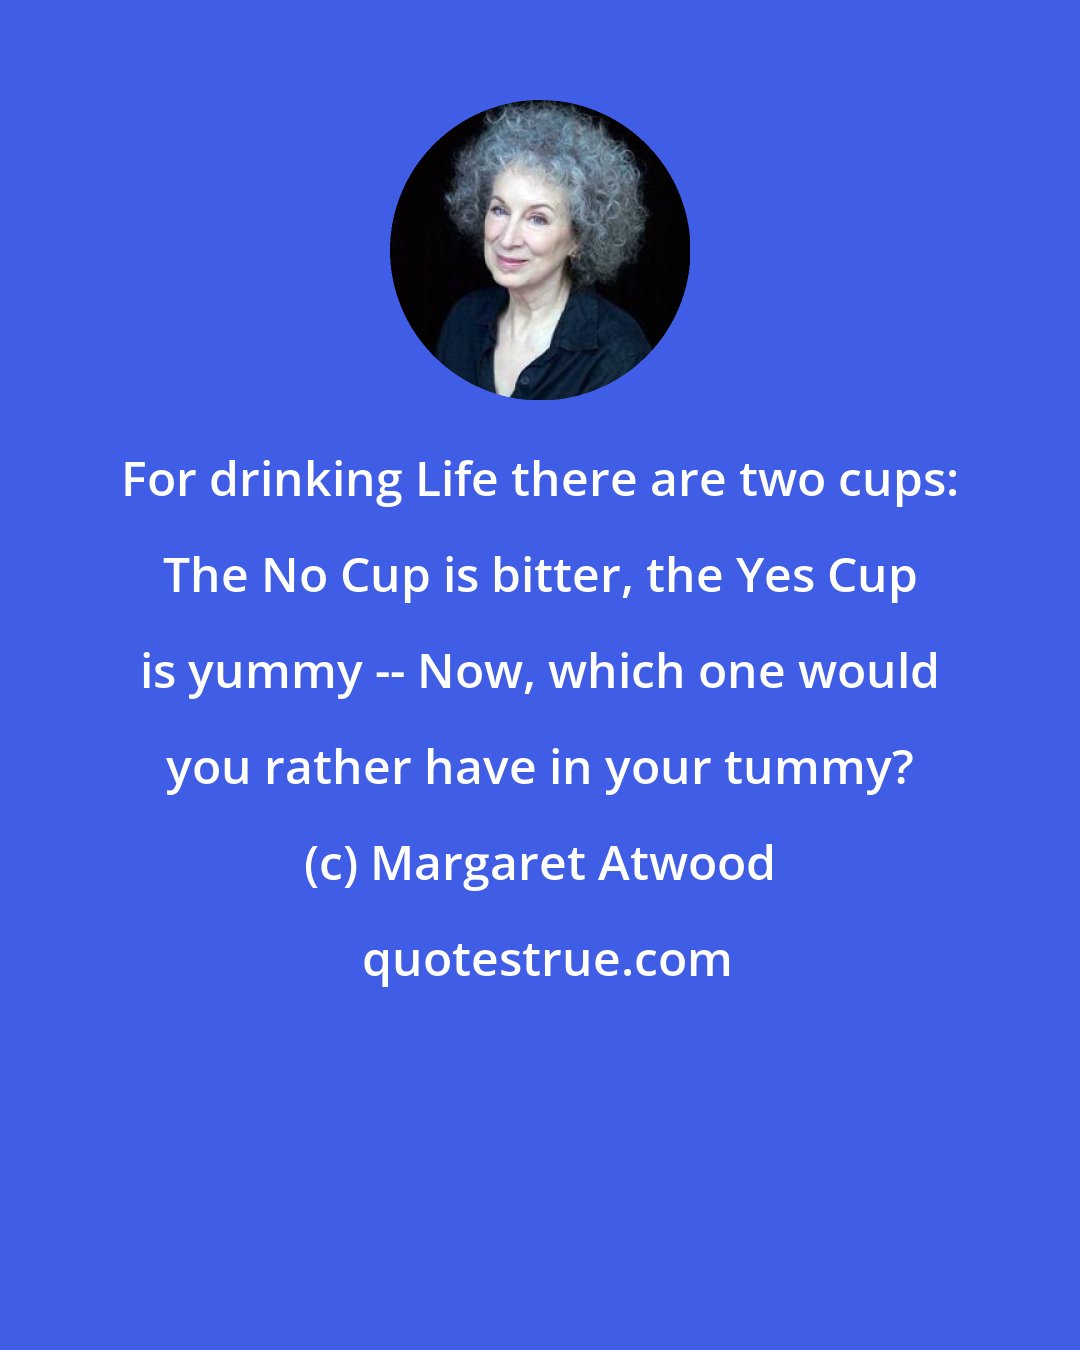 Margaret Atwood: For drinking Life there are two cups: The No Cup is bitter, the Yes Cup is yummy -- Now, which one would you rather have in your tummy?